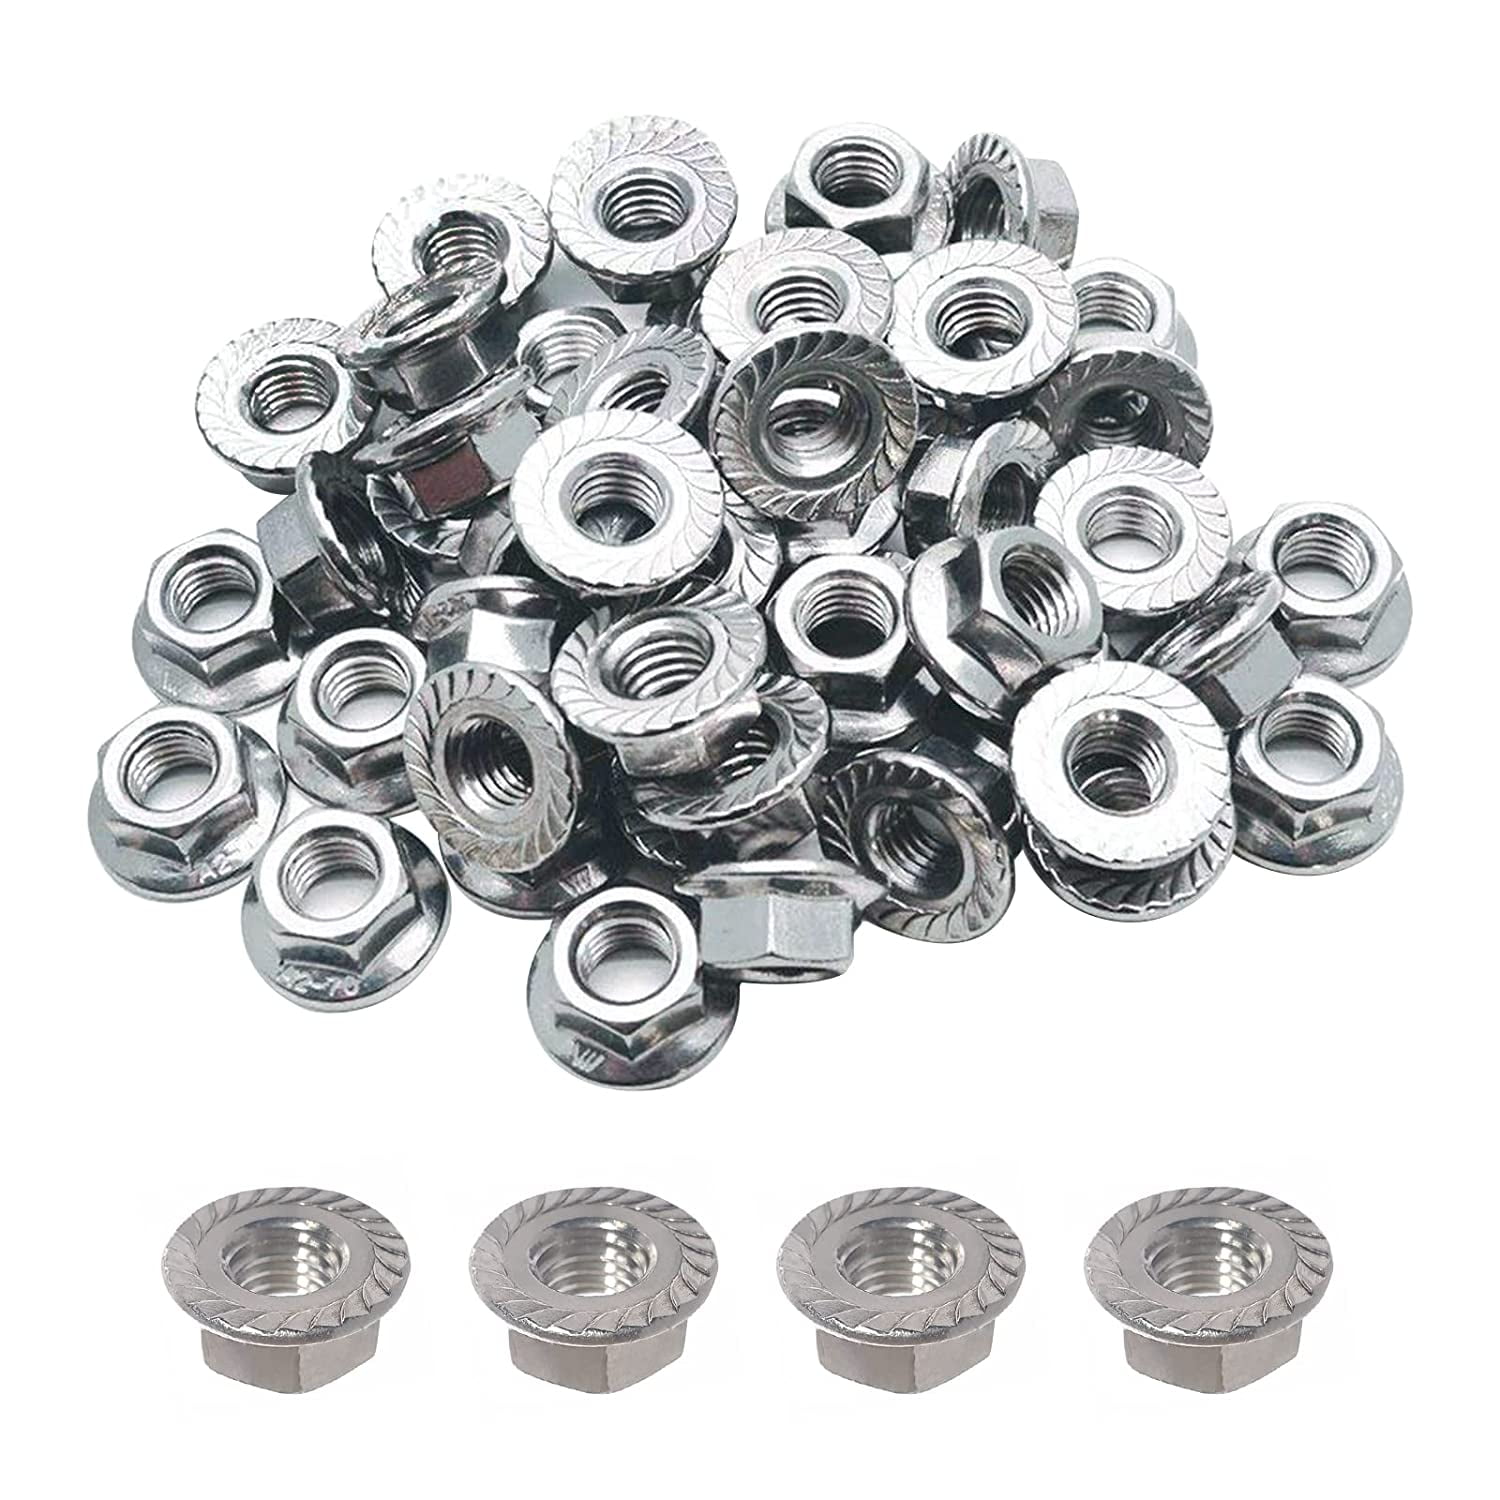 50pcs M2 Dia 2mm Hex Screw Nut Stainless Steel Nuts Good Quality DIY 